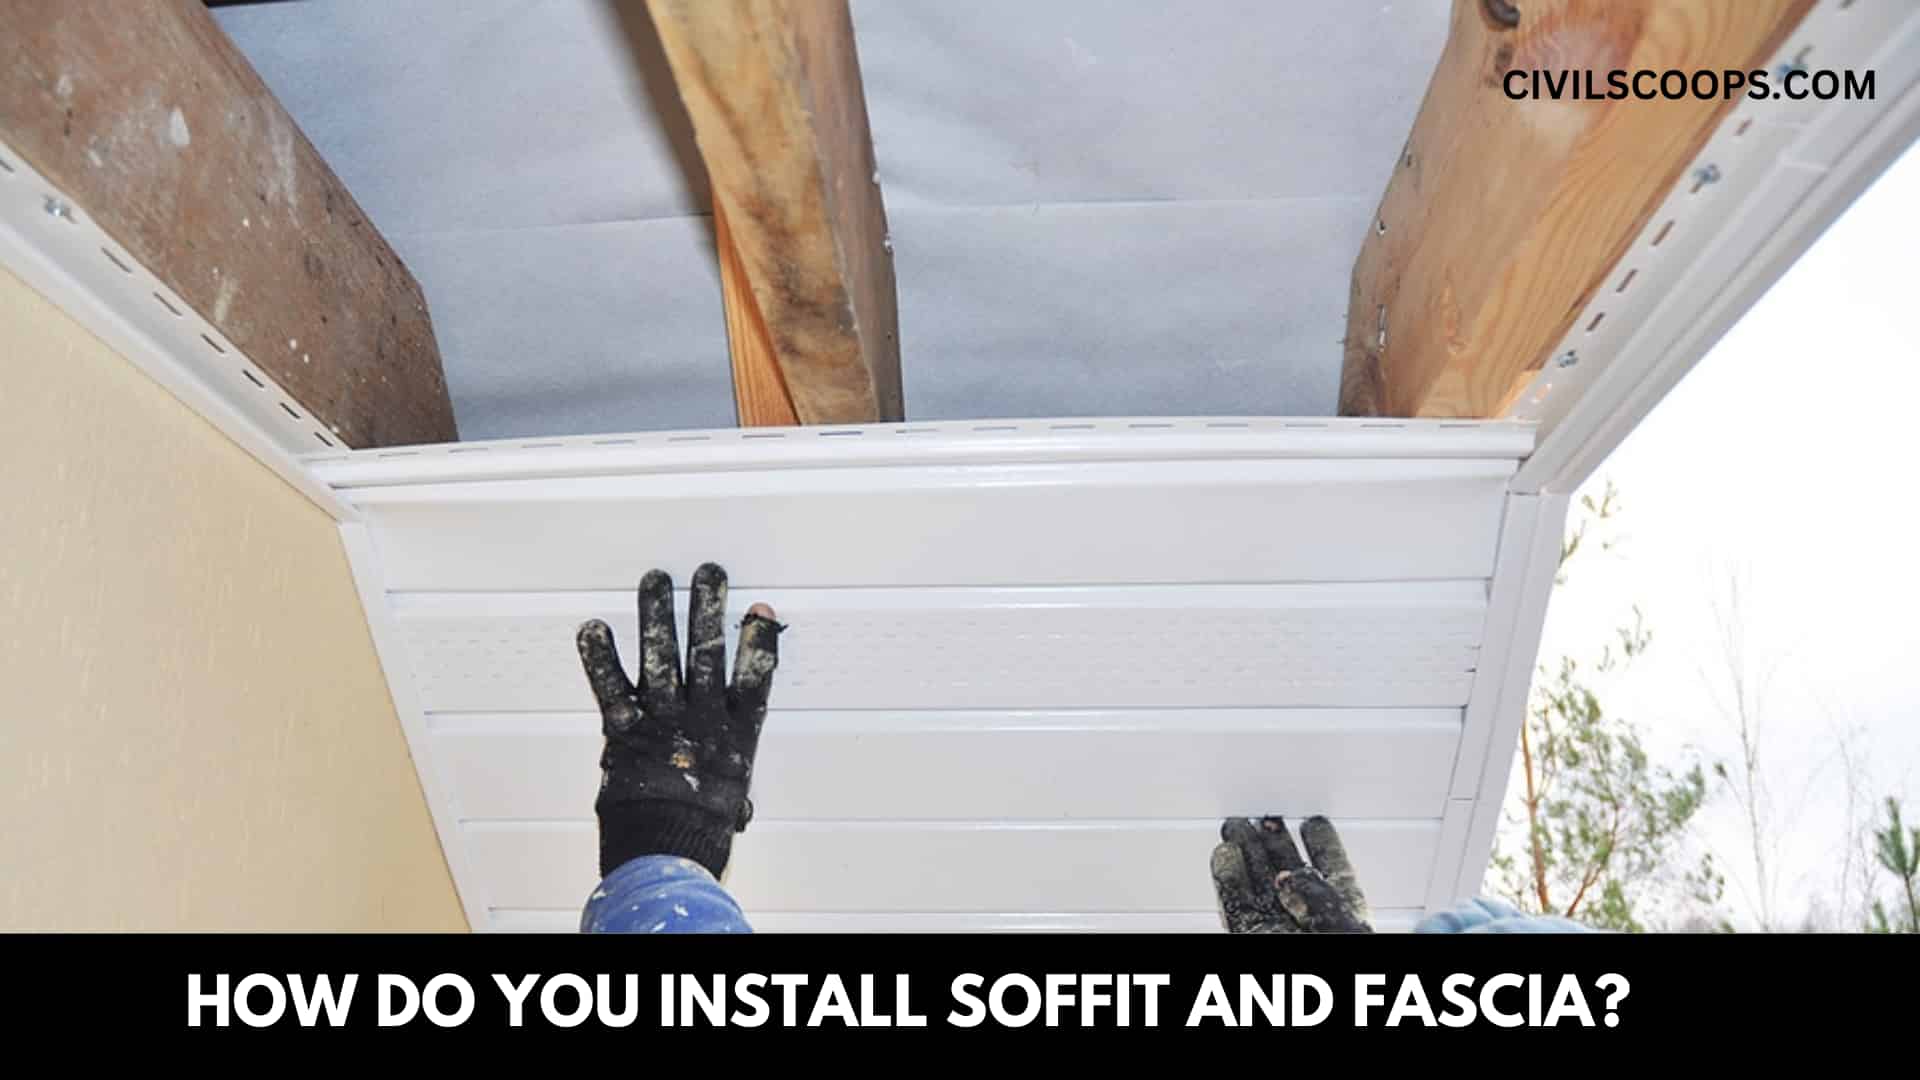 How Do You Install Soffit and Fascia?